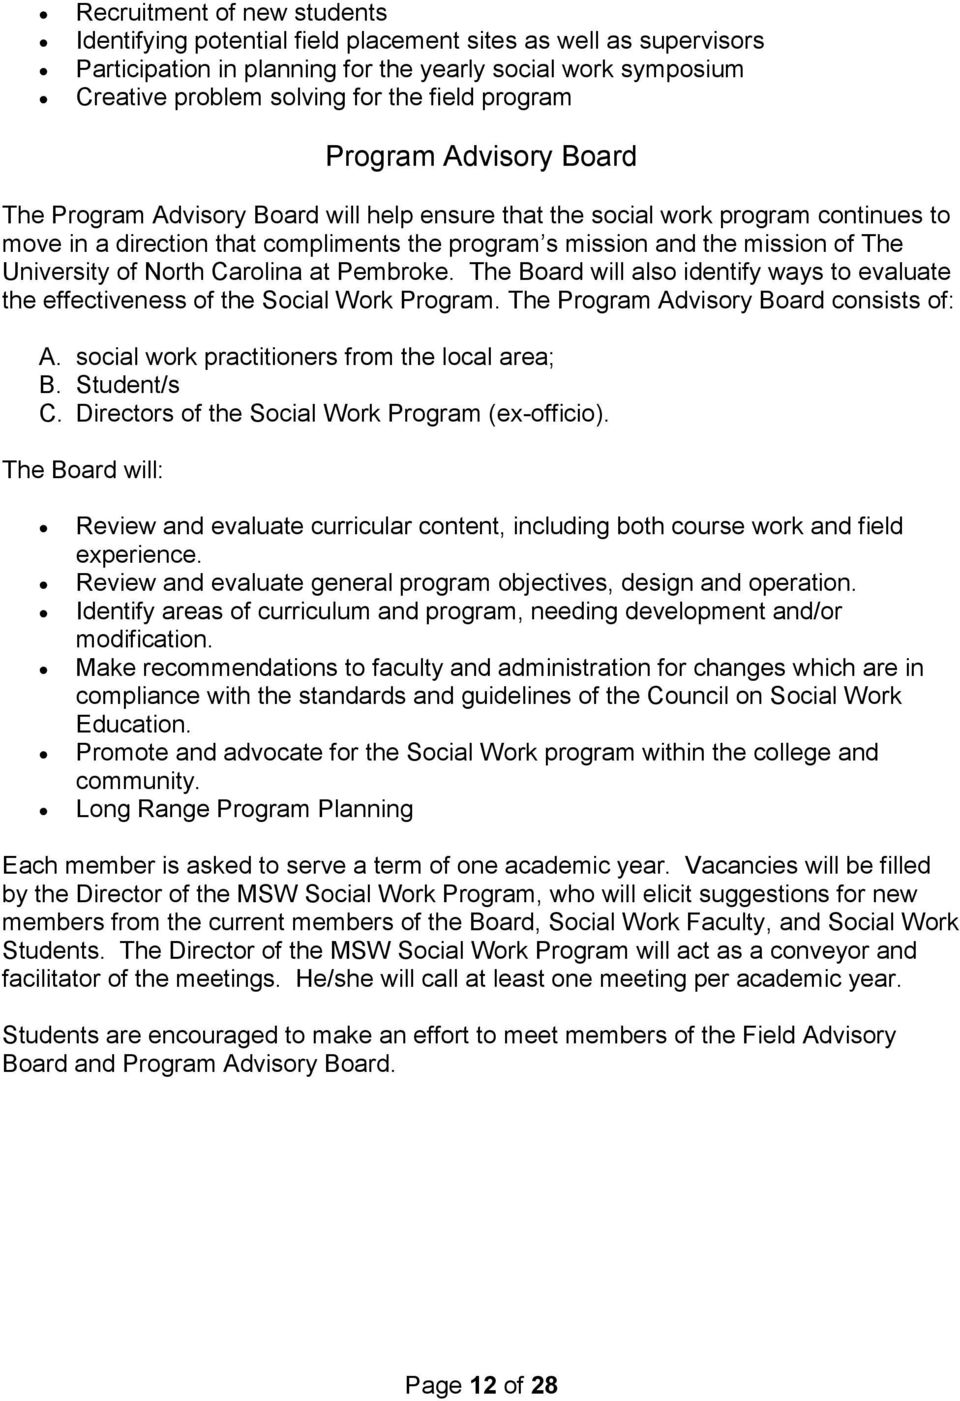 University of North Carolina at Pembroke. The Board will also identify ways to evaluate the effectiveness of the Social Work Program. The Program Advisory Board consists of: A.